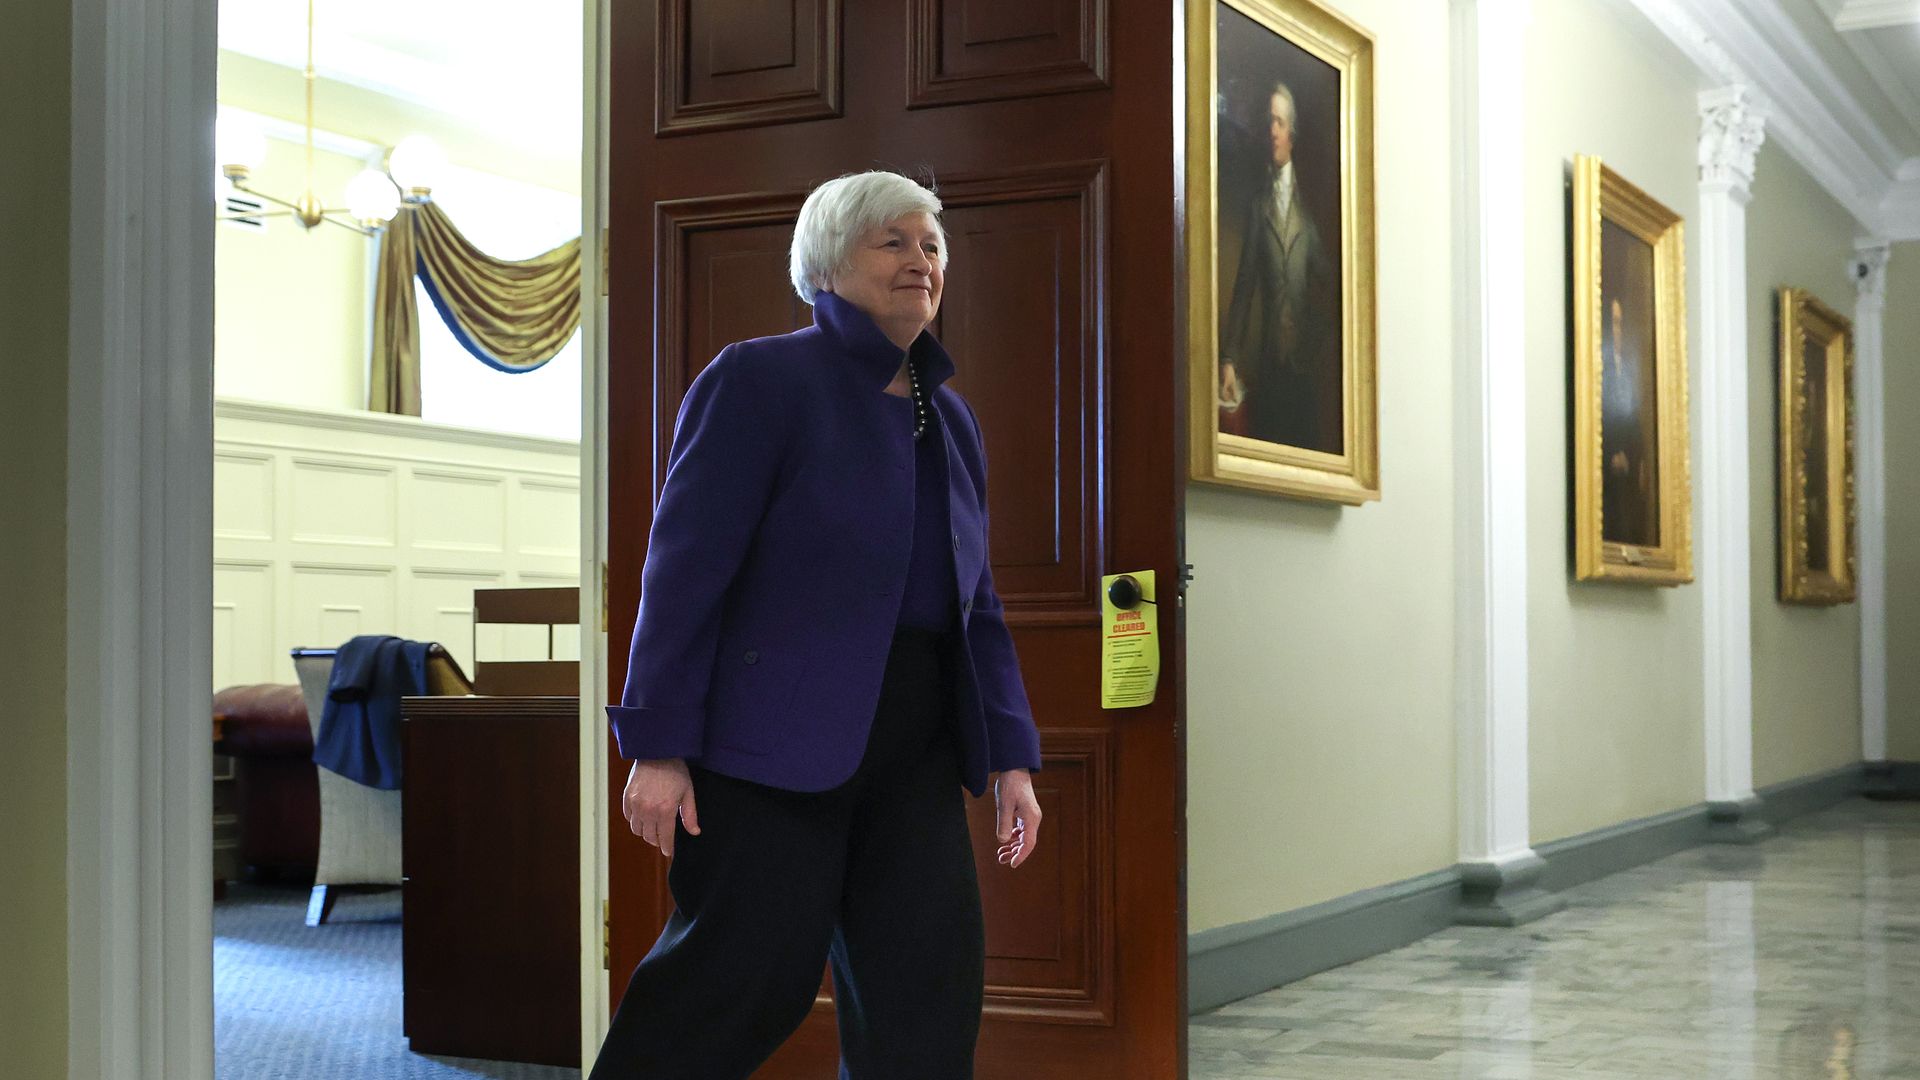 Janet Yellen walks out of a door in a purple suit to meeting some people we don't see but presumer are there